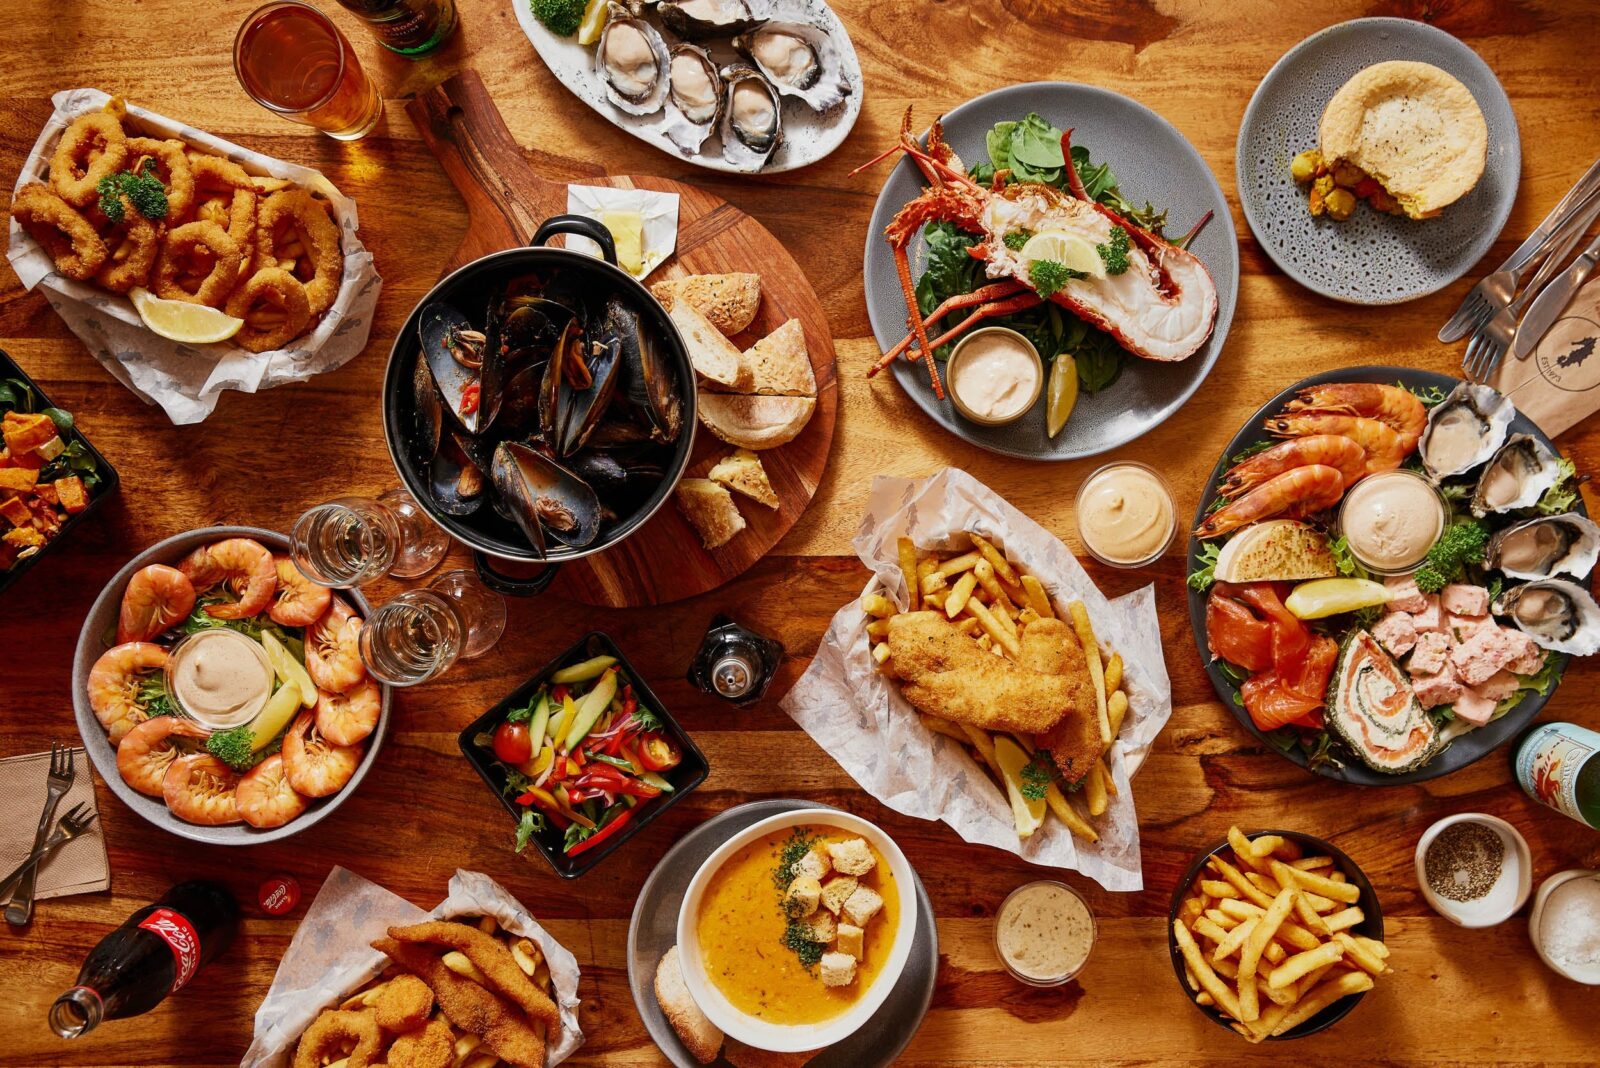 A table displaying a range of seafood dishes including crayfish, oysters, fish & chips and more